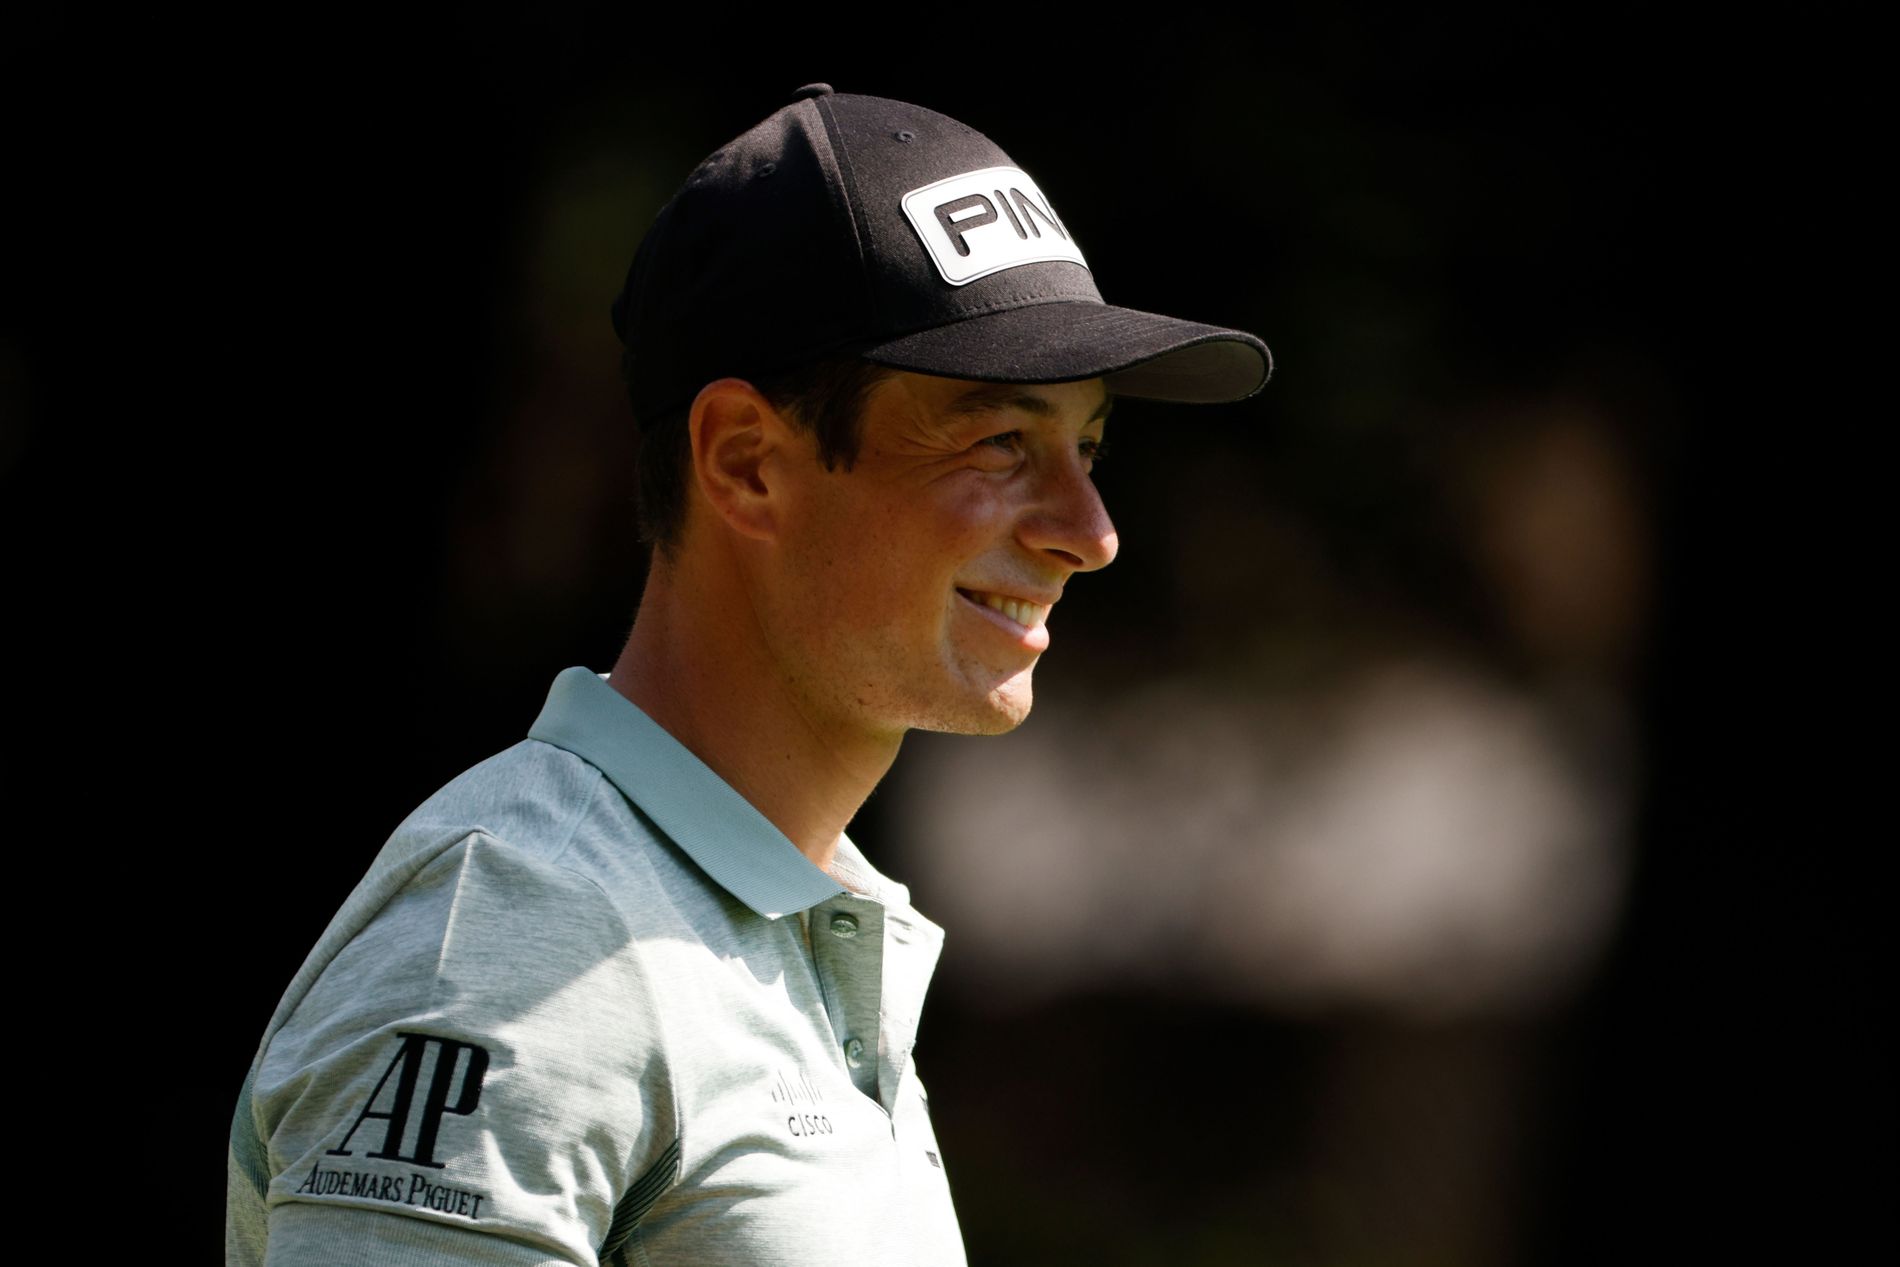 Hovland shared fifth place in the PGA Final - taking home nearly 20 million crowns - VG